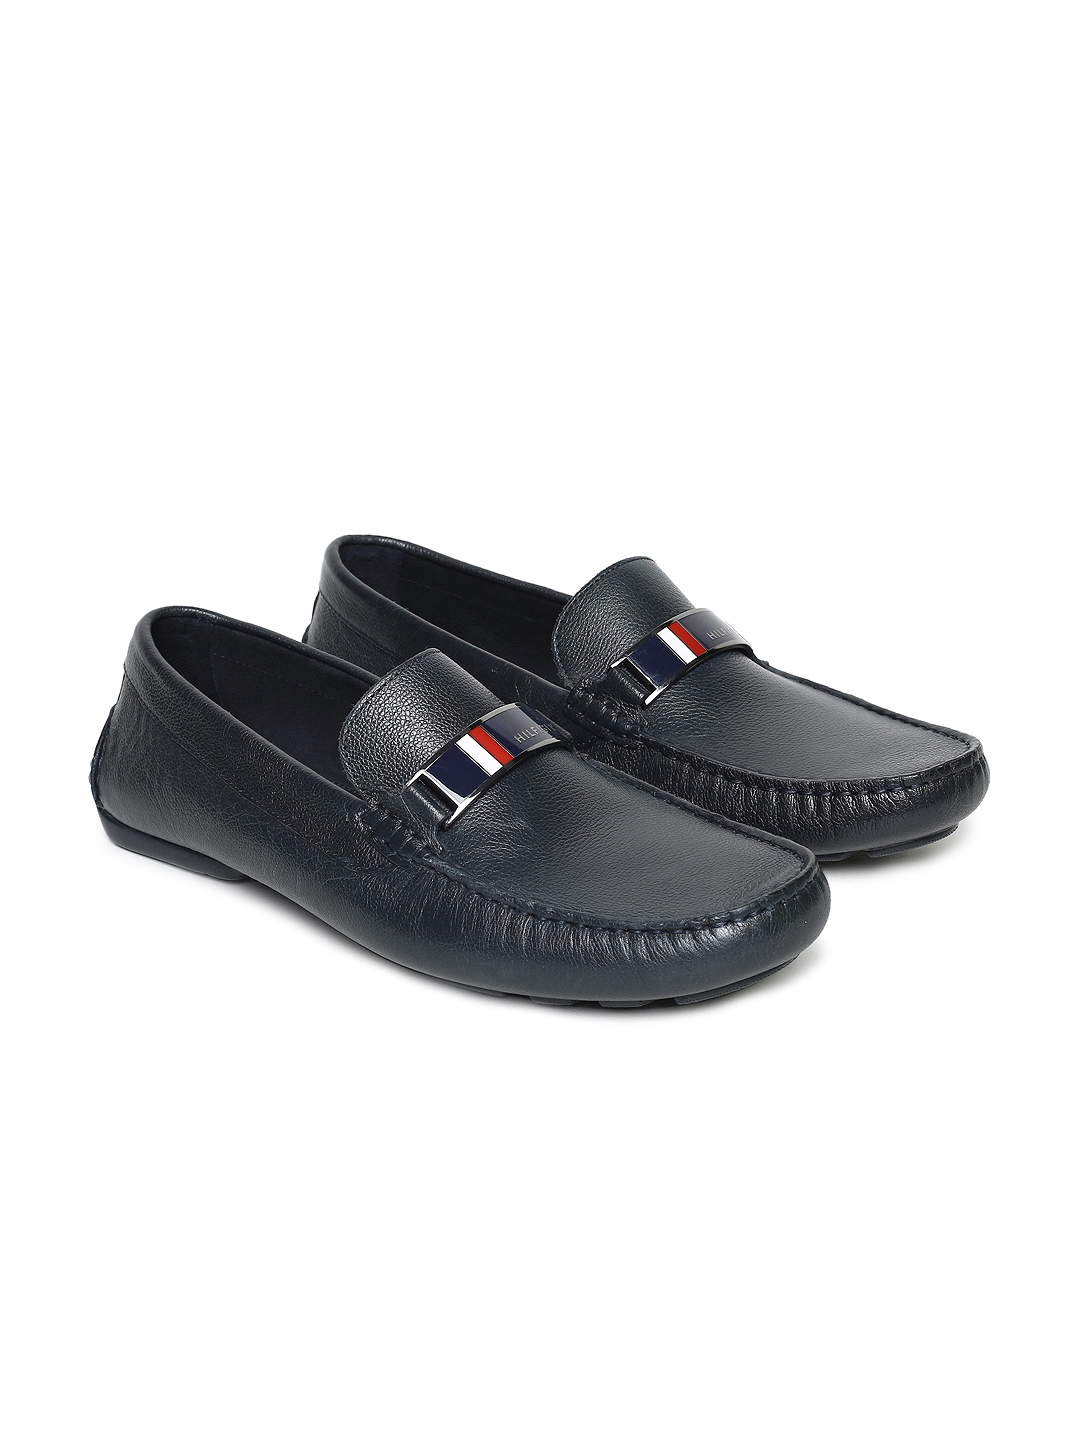 Buy Tommy Hilfiger Men Navy Blue Leather Loafers - Casual Shoes for Men ...